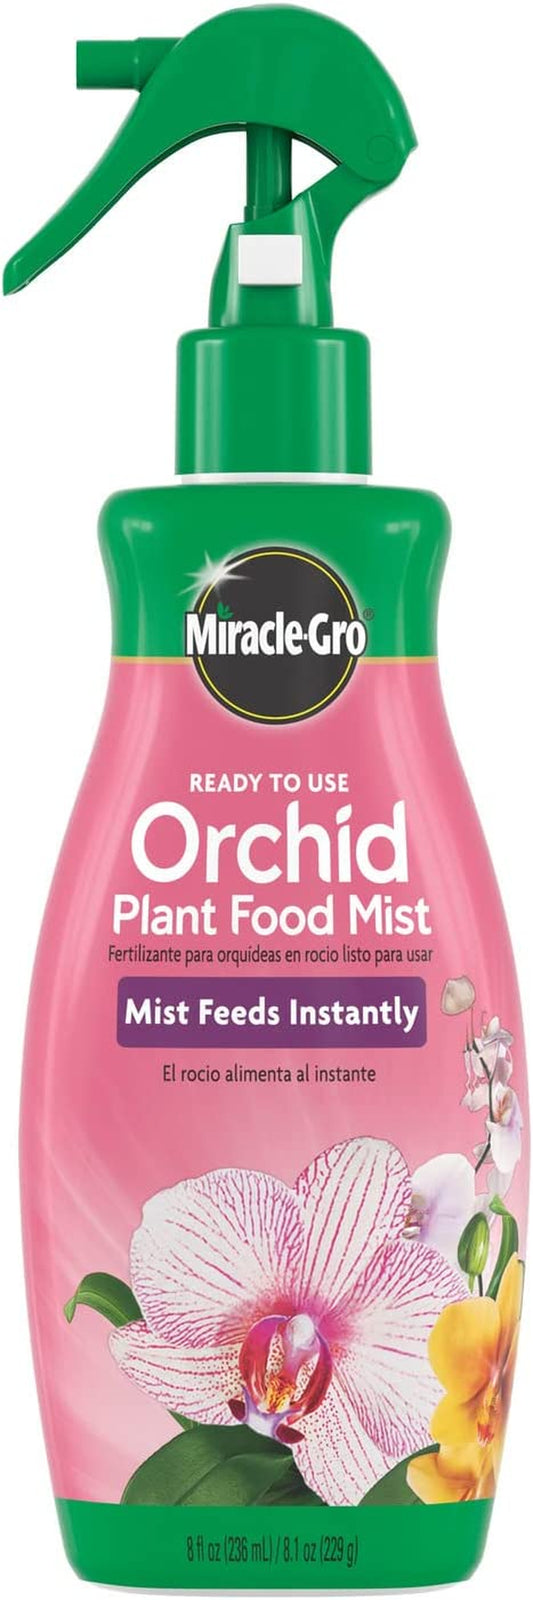 Miracle-Gro Ready-To-Use Orchid Plant Food Mist, 8 Oz., Feeds Plants Instantly, 1 Pack